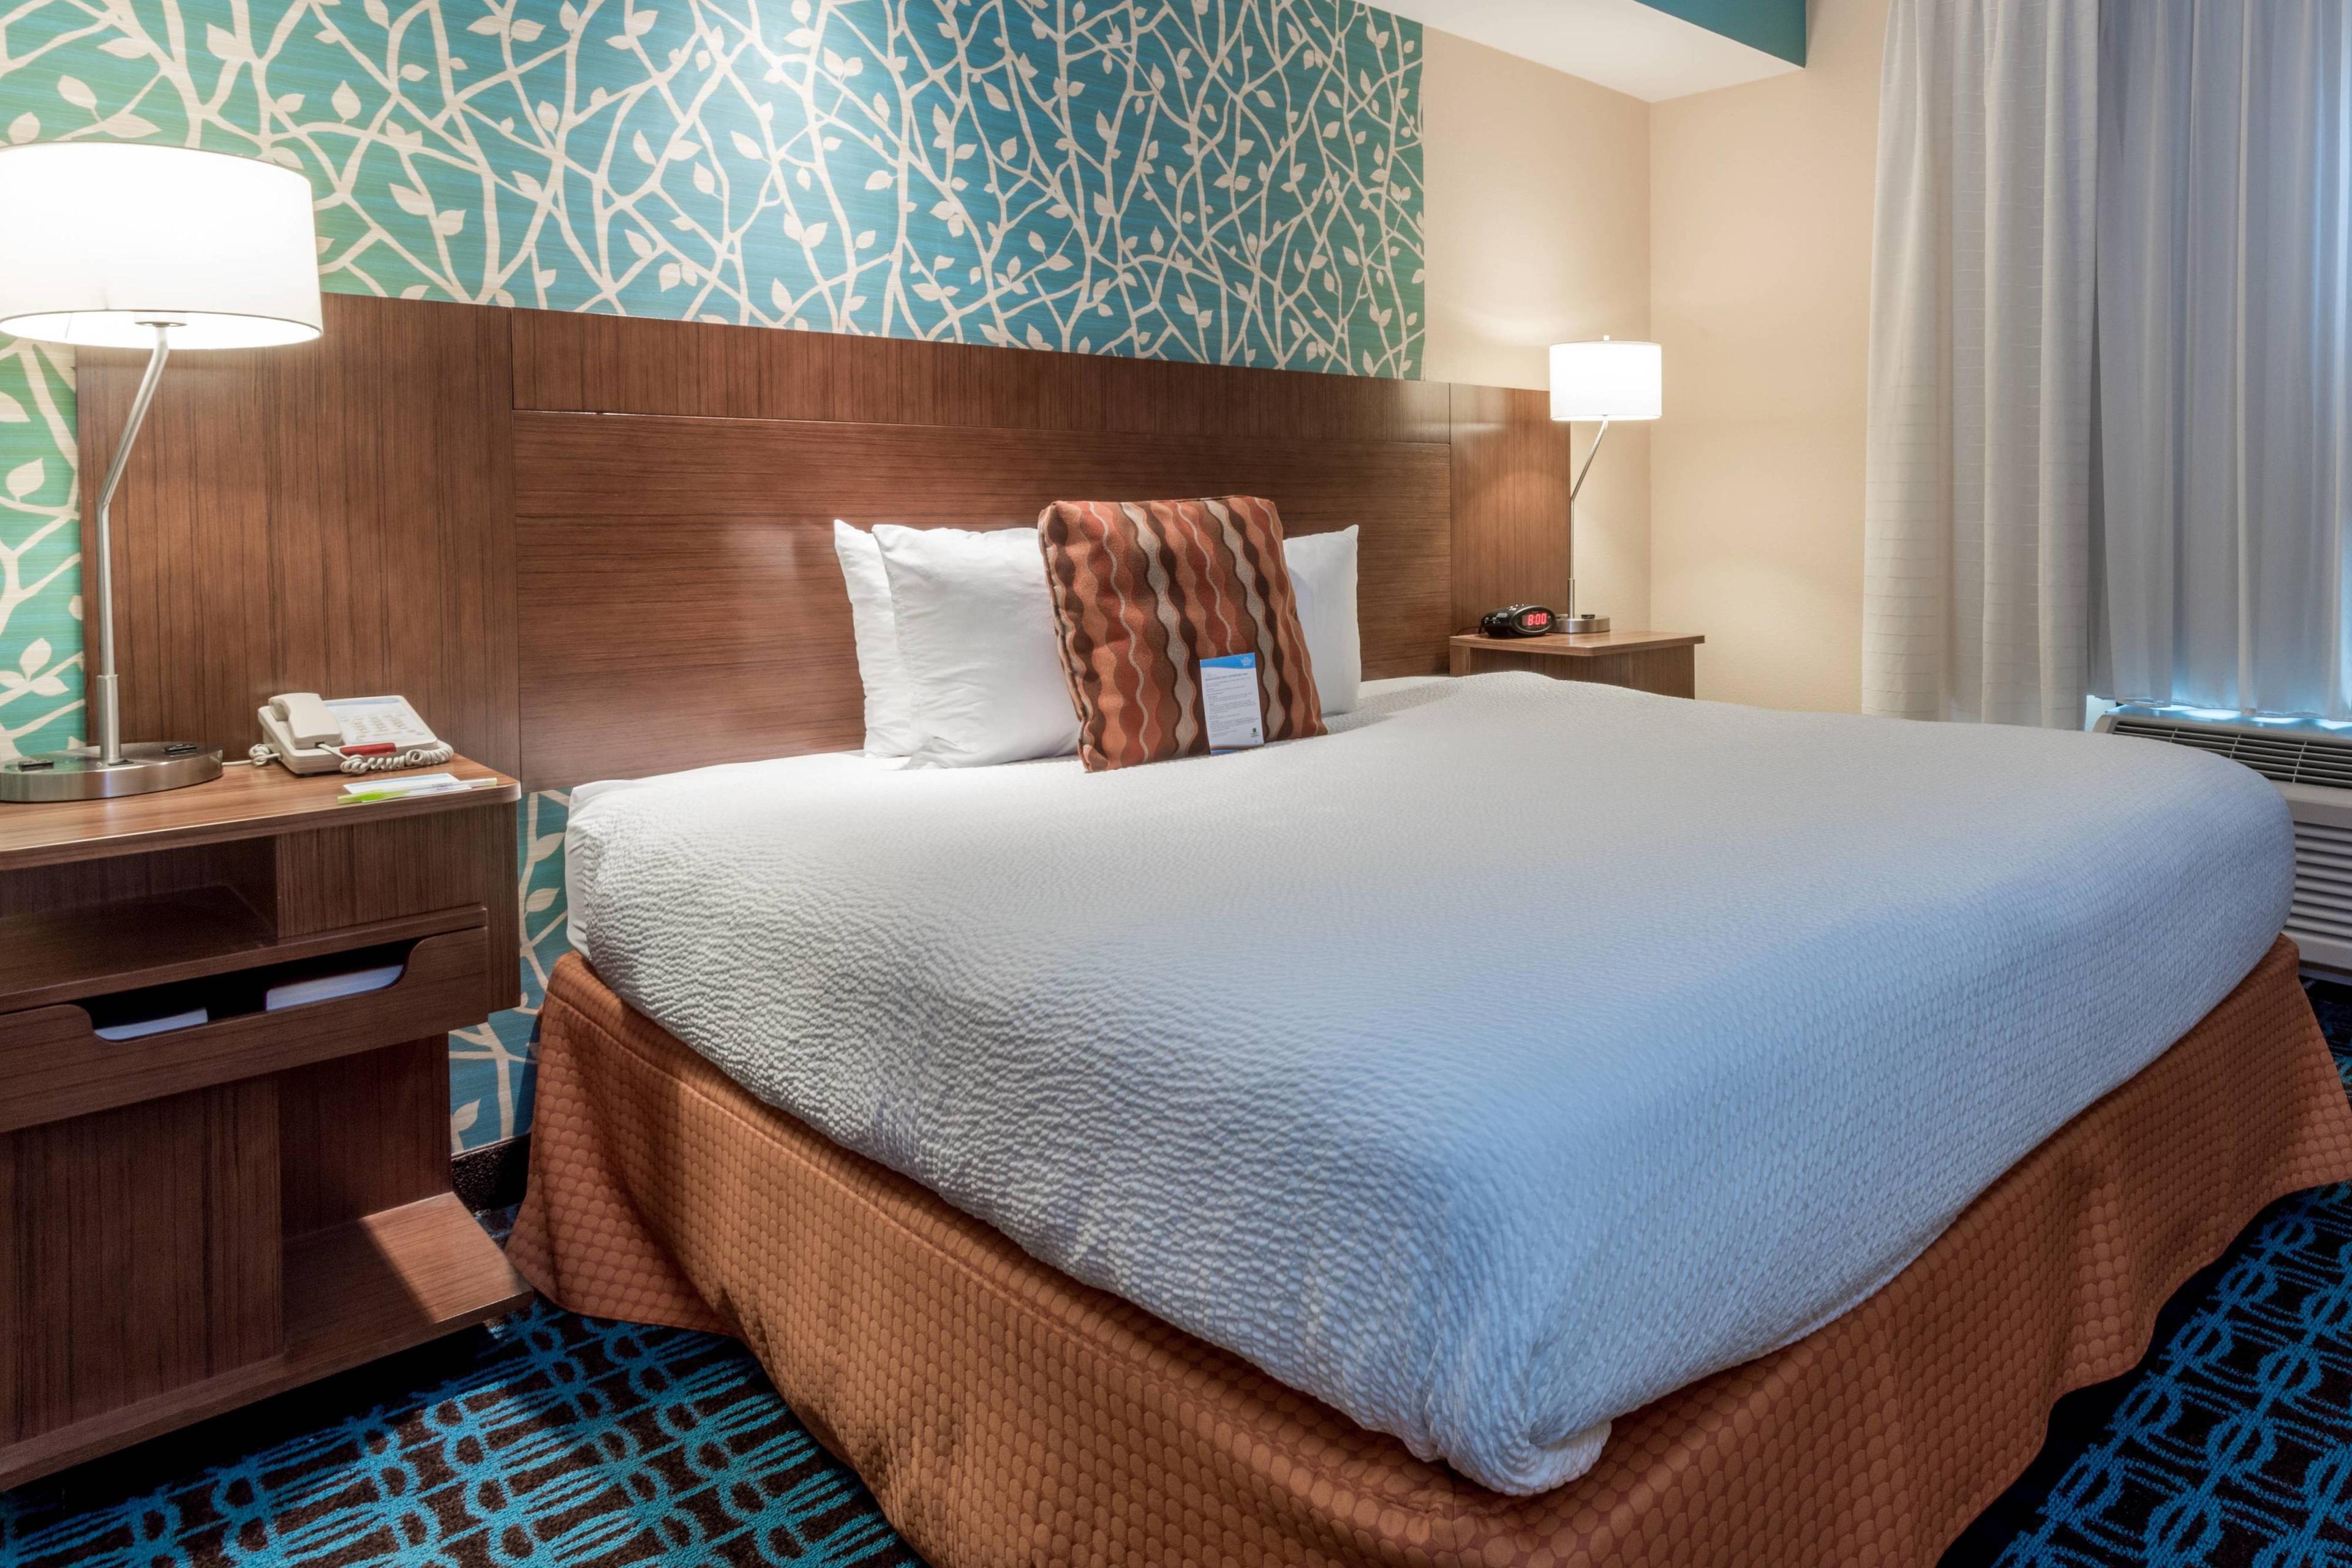 Enjoy our king-size bed, complete with plush pillows that will make you feel like you're sleeping on clouds.